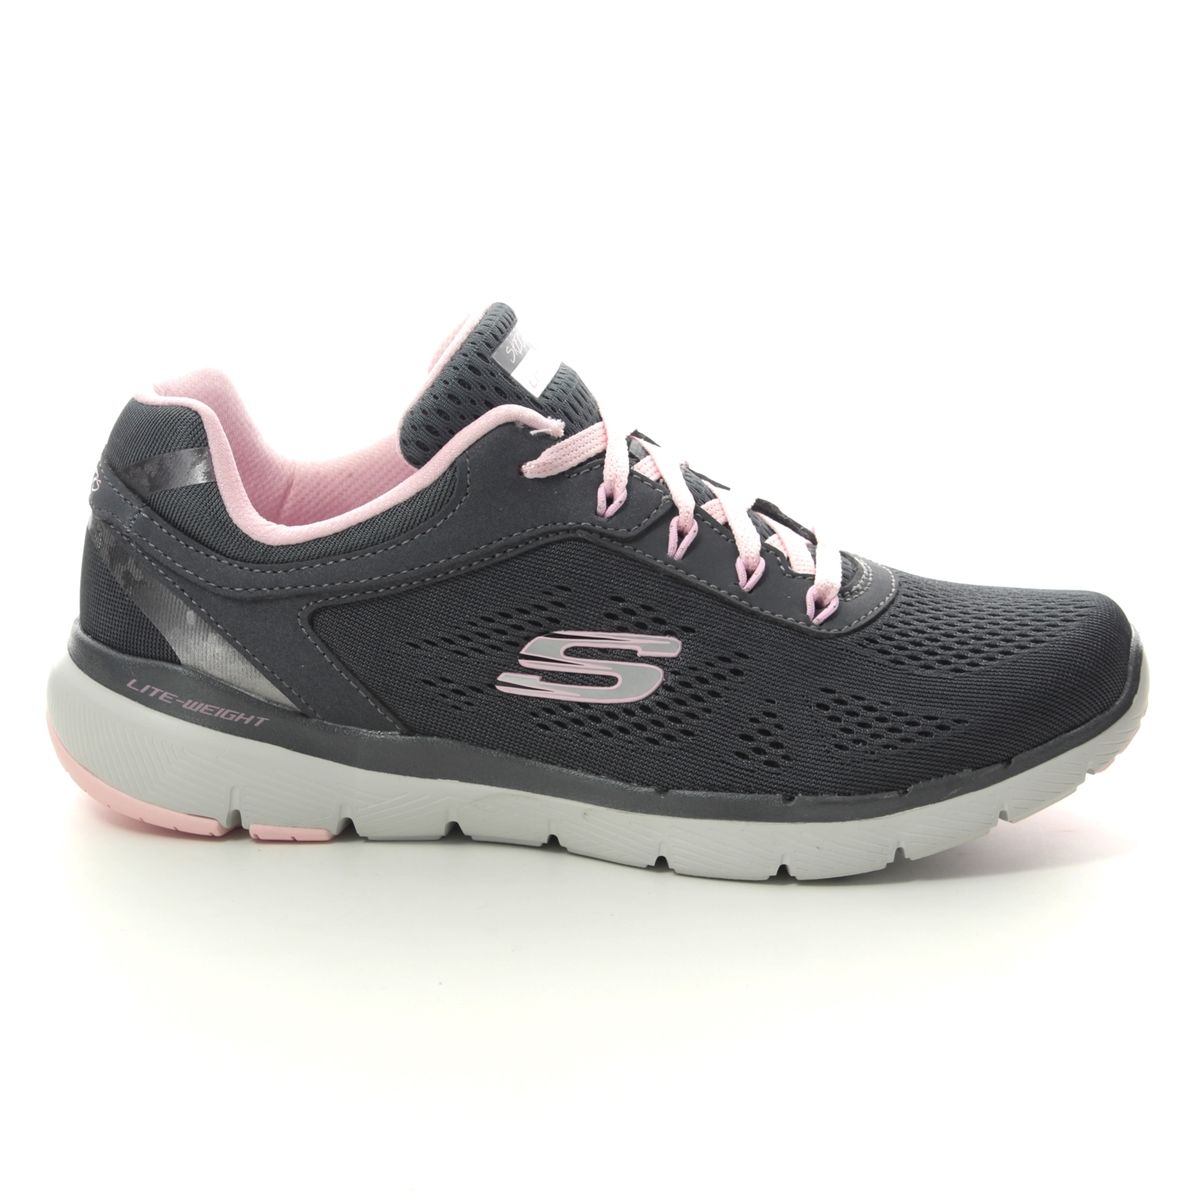 Skechers Moving Fast Flx 13059 CCPK Charcoal trainers